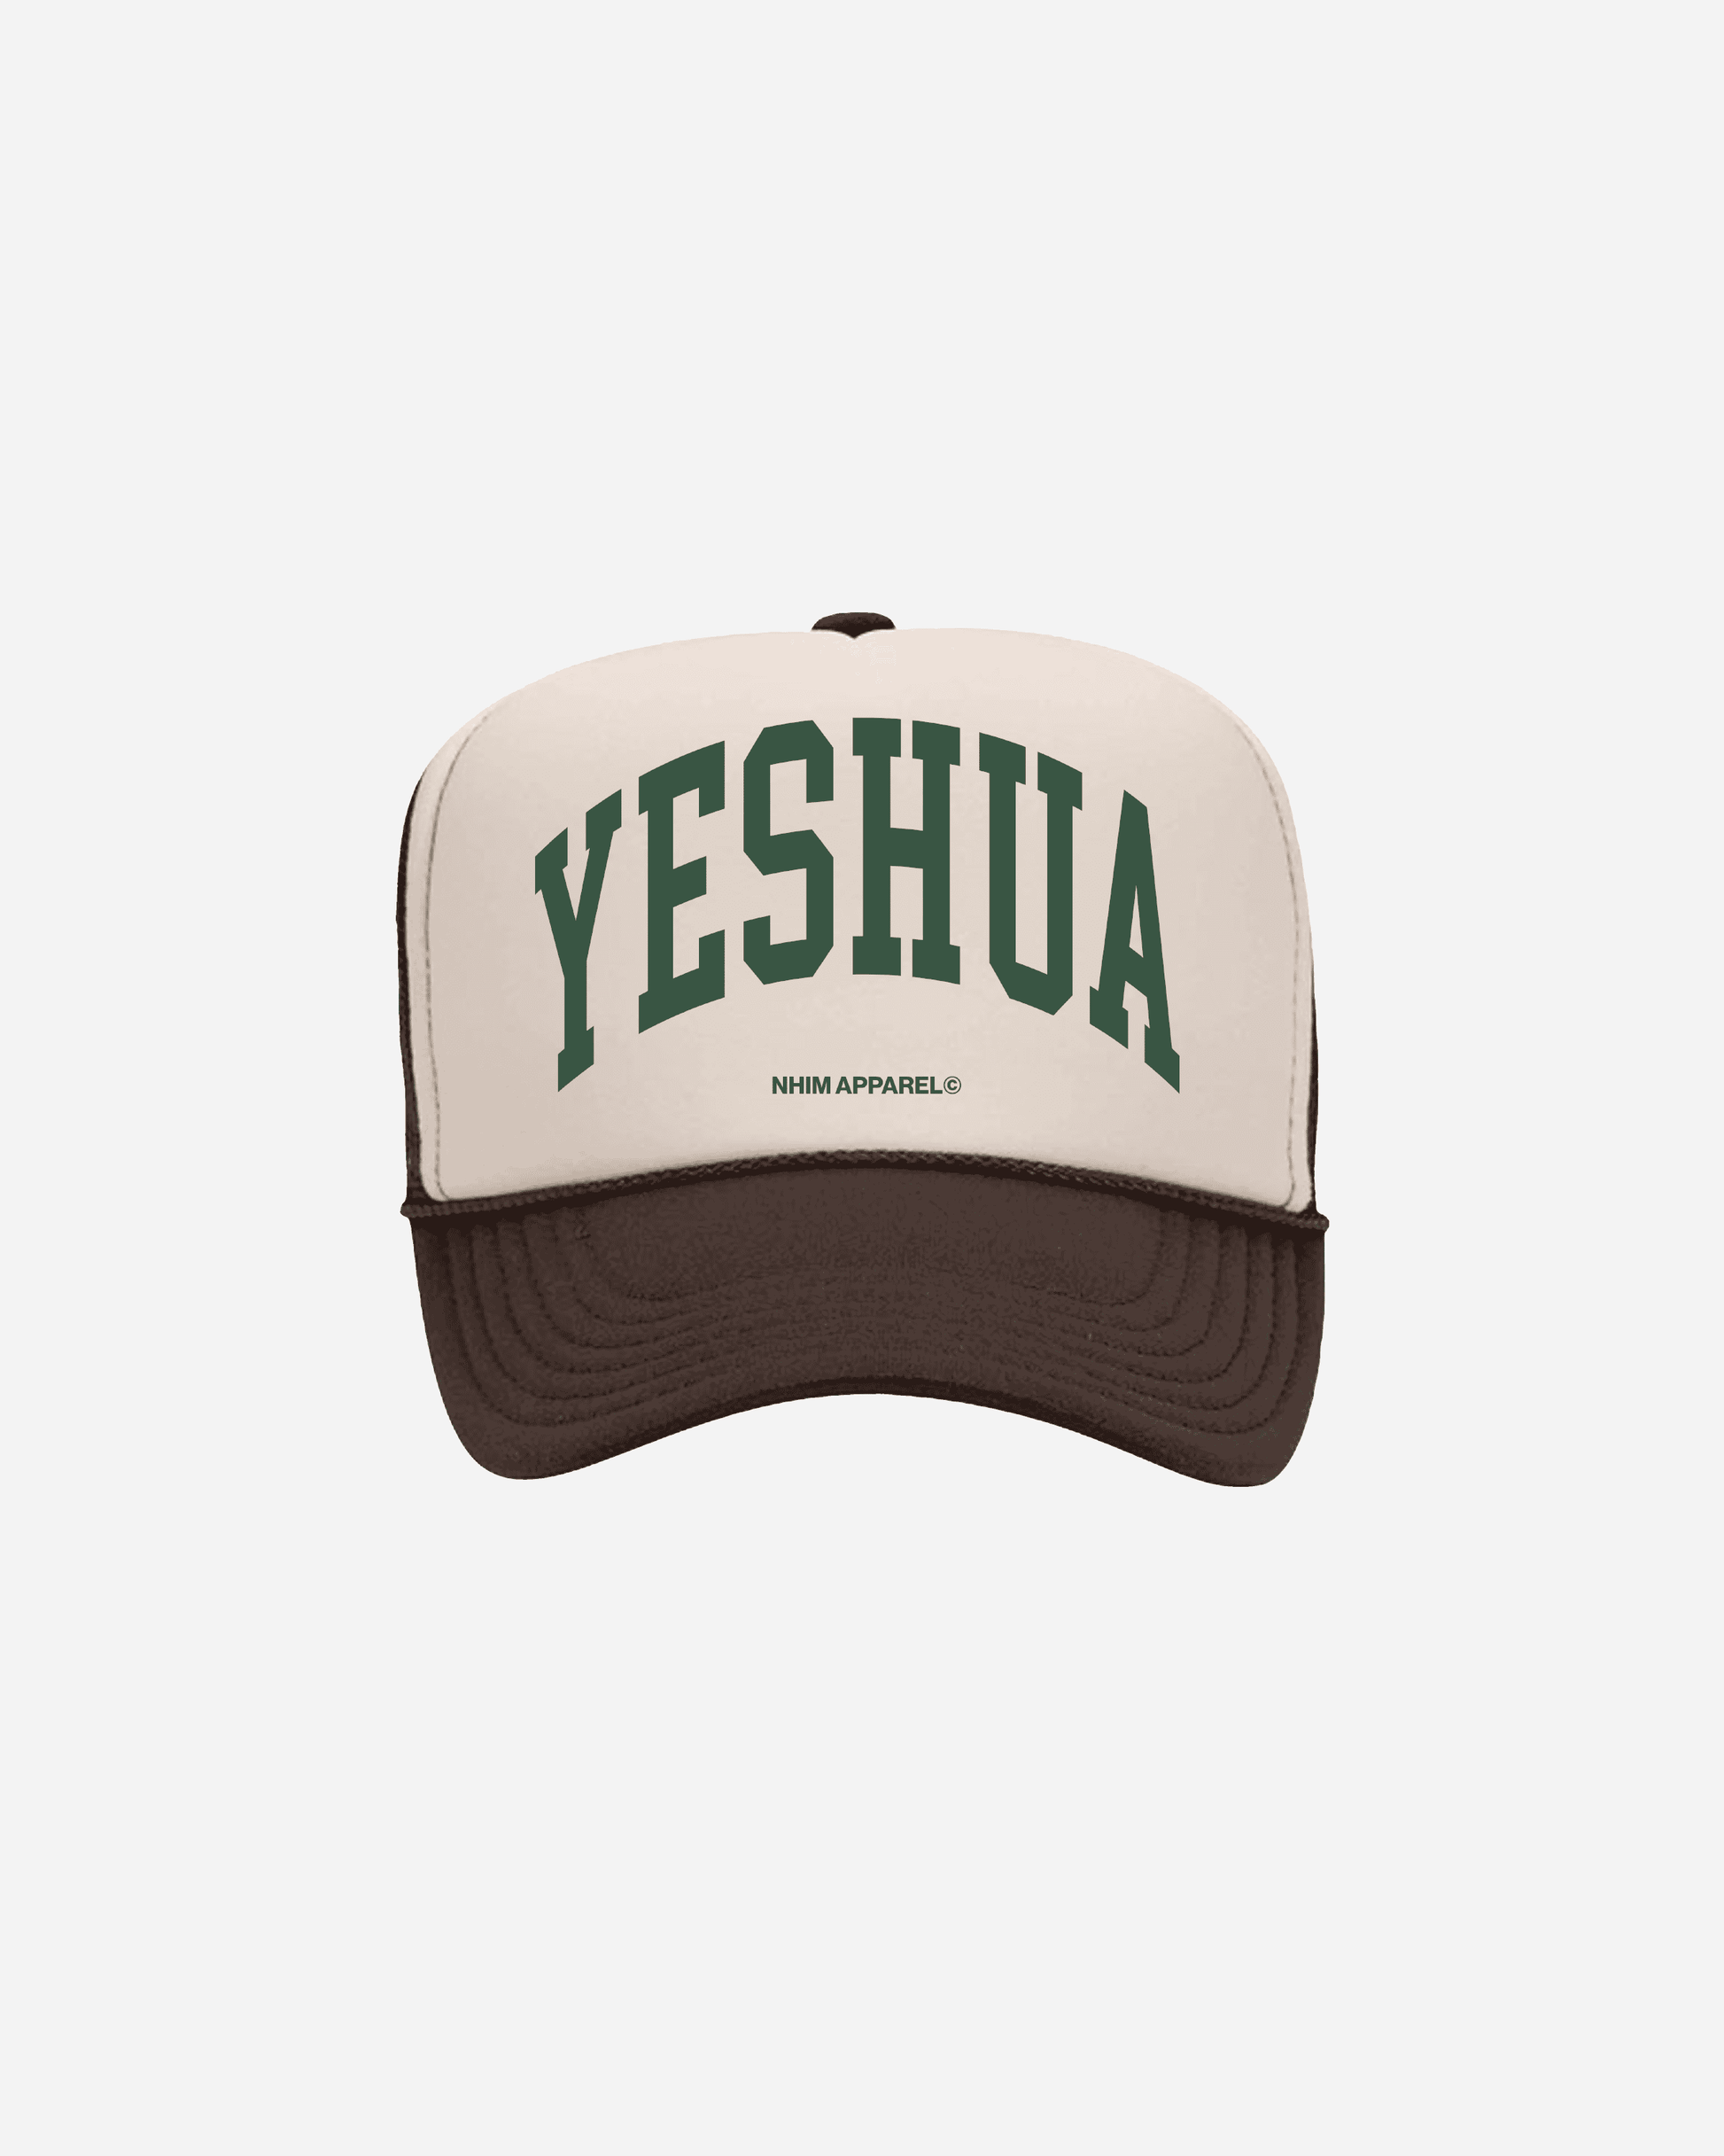 yeshua logo christian trucker hat in brown and tan by NHIM Apparel Christian clothing brand